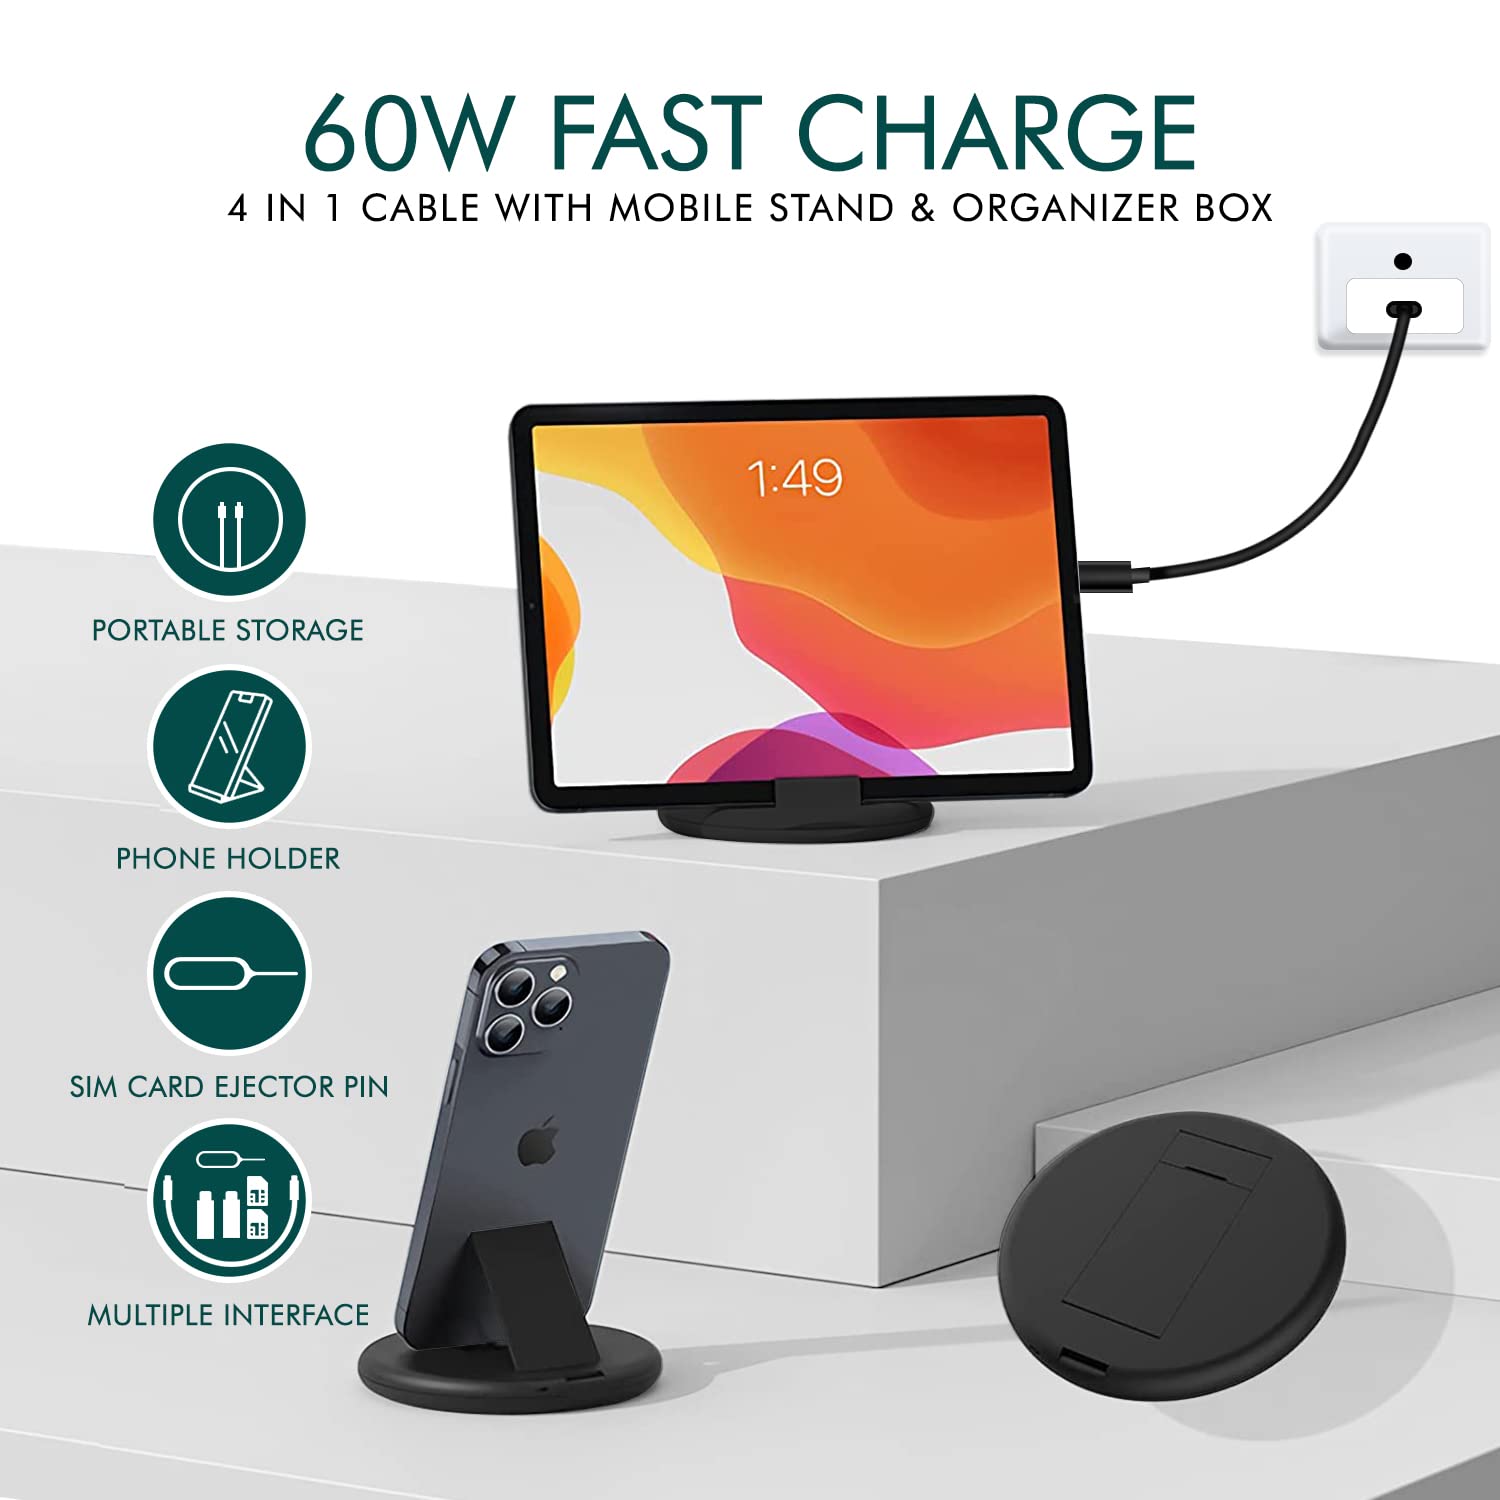 All In One 60W USB Fast Charging Travel Cable Set Type C, Lightening and Micro USB Port Inbuilt Mobile Stand Compatible with iPhone, iPad,Samsung,OnePlus, Mi,Oppo,Vivo,iQOO (All in 1, Black)